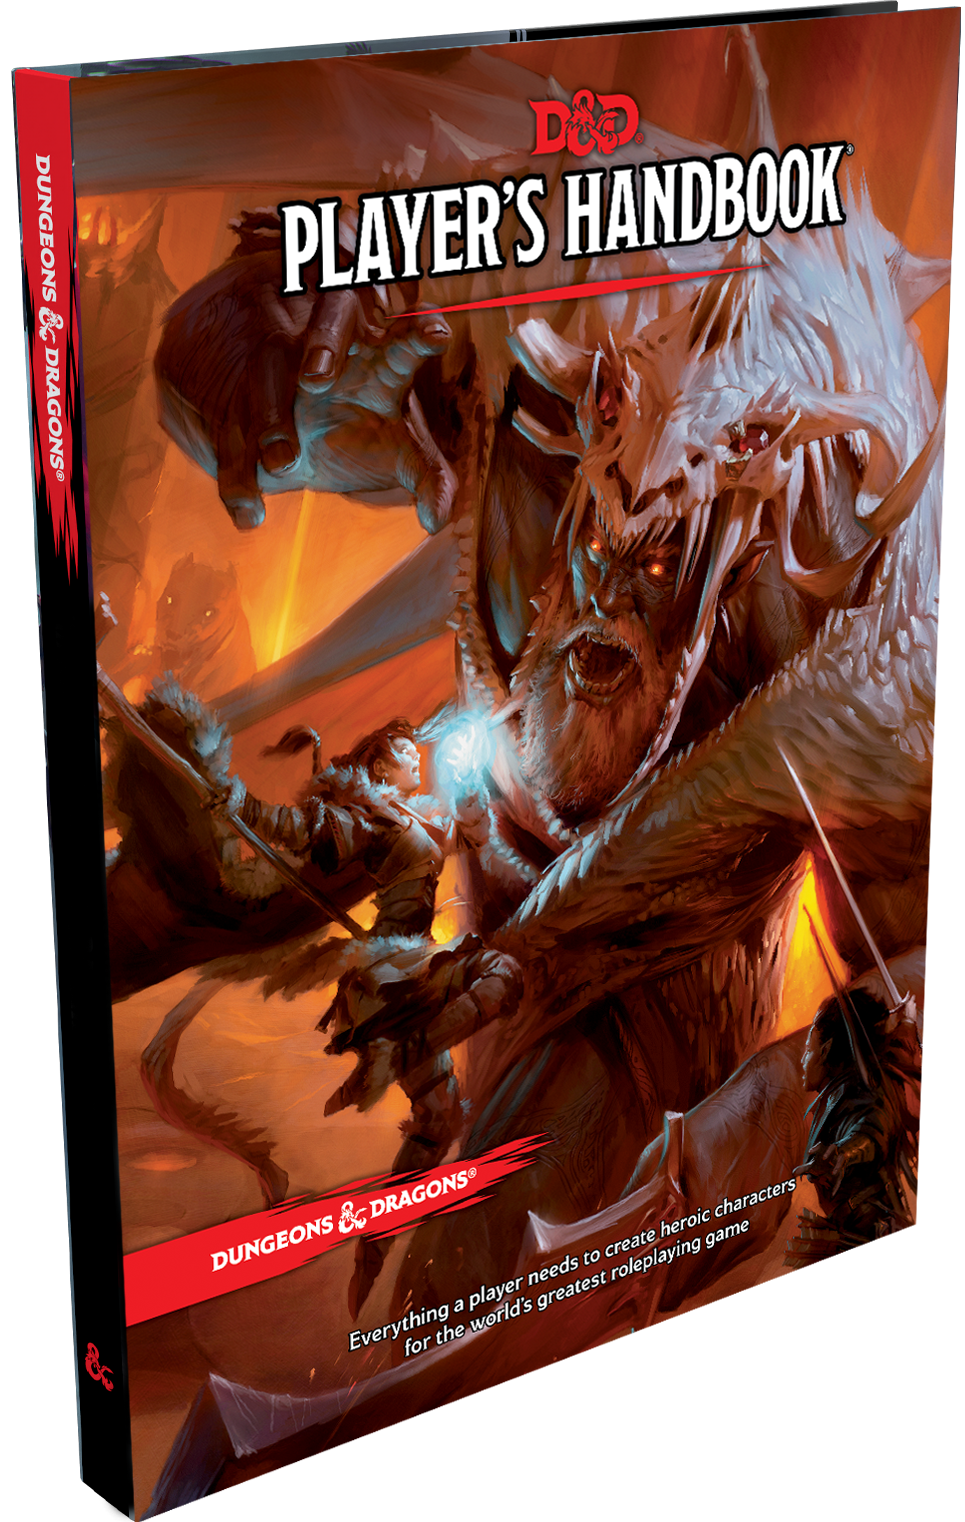 d&d players guide